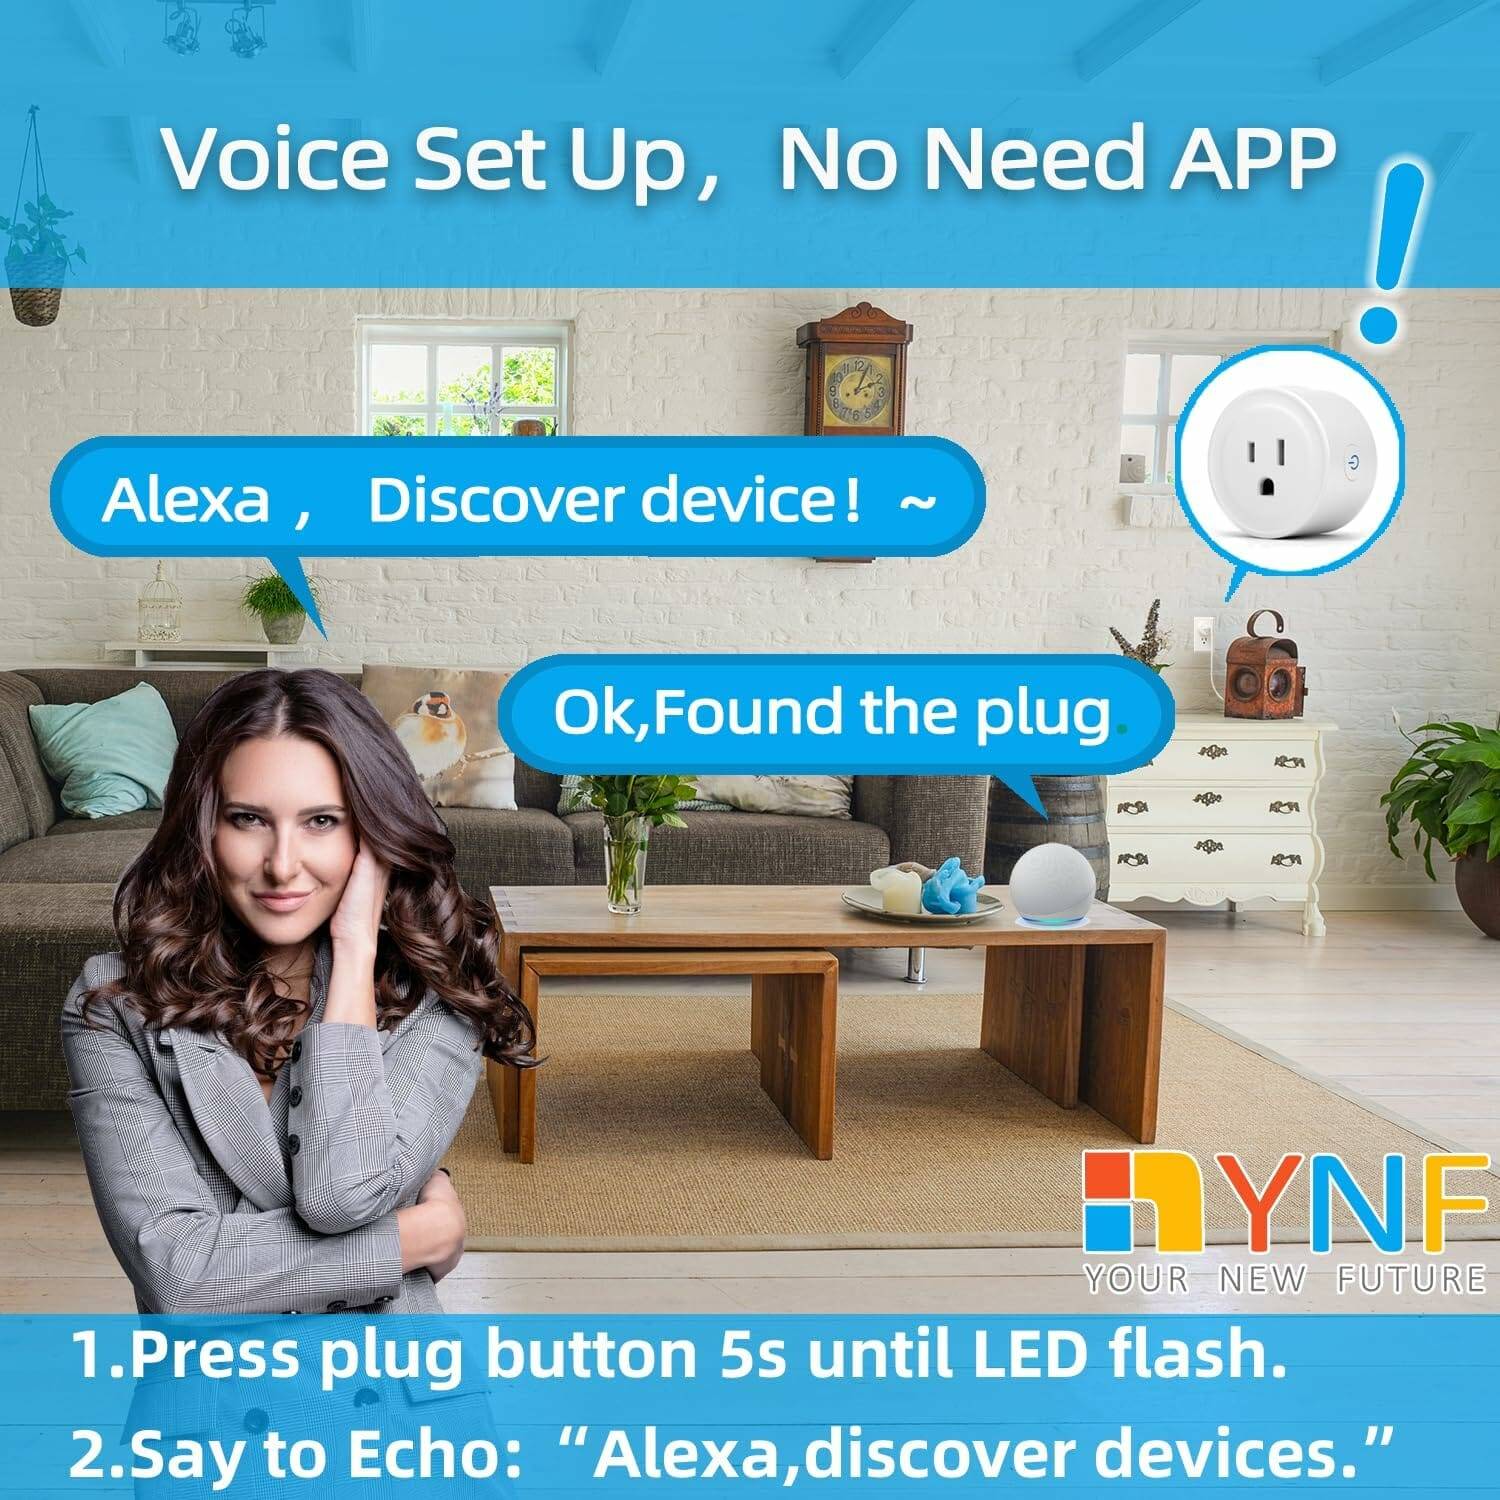 Alexa Smart Plug YNF, Simple Set Up with One Voice Command, “Amazon Alexa” APP Remote Control, Voice Control, Timer Schedulete, Stable Connection, Bluetooth Mesh, Require Alexa Echo（4 Pack）: Tools Home Improvement